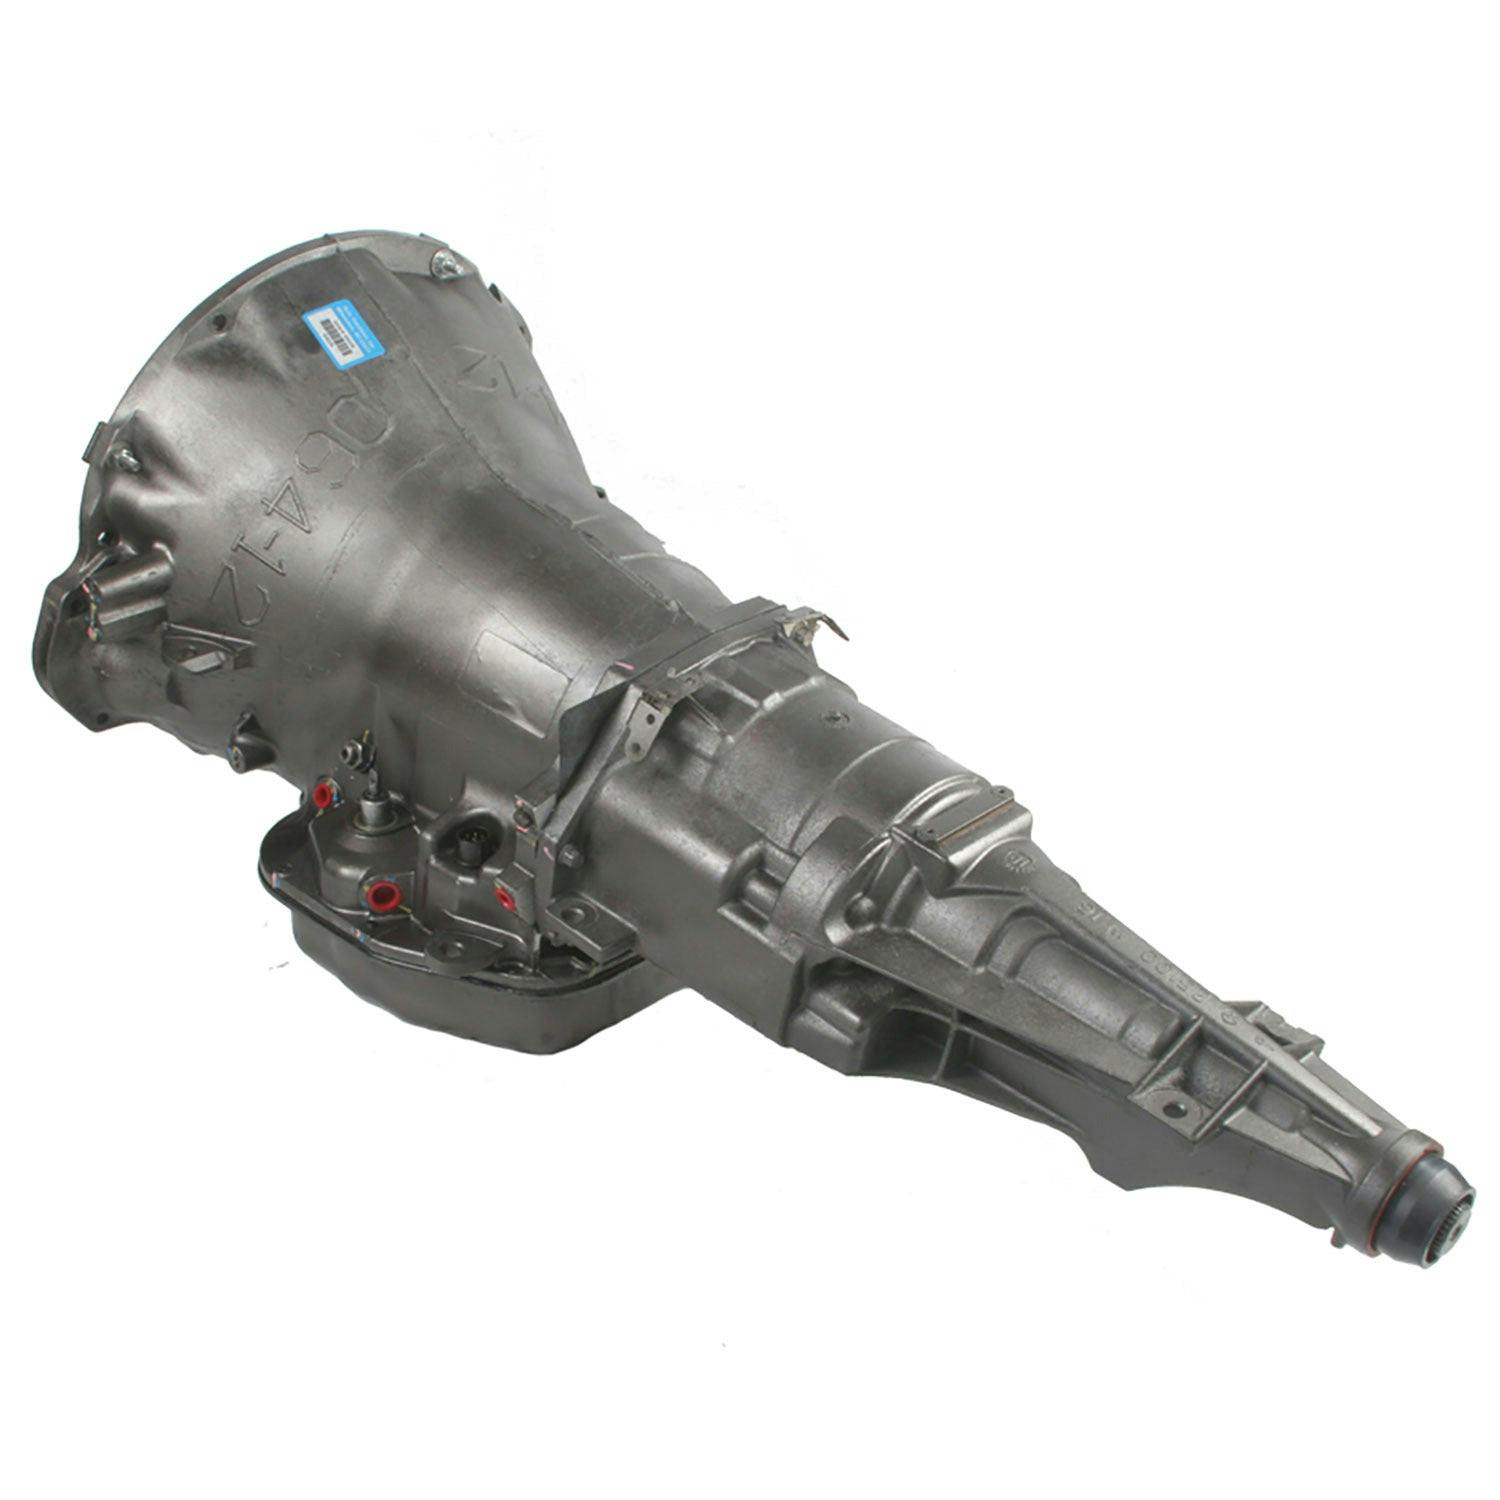 Automatic Transmission for 2000-2001 Dodge Ram 1500/2500/3500 4WD with 5.9L V8 Engine